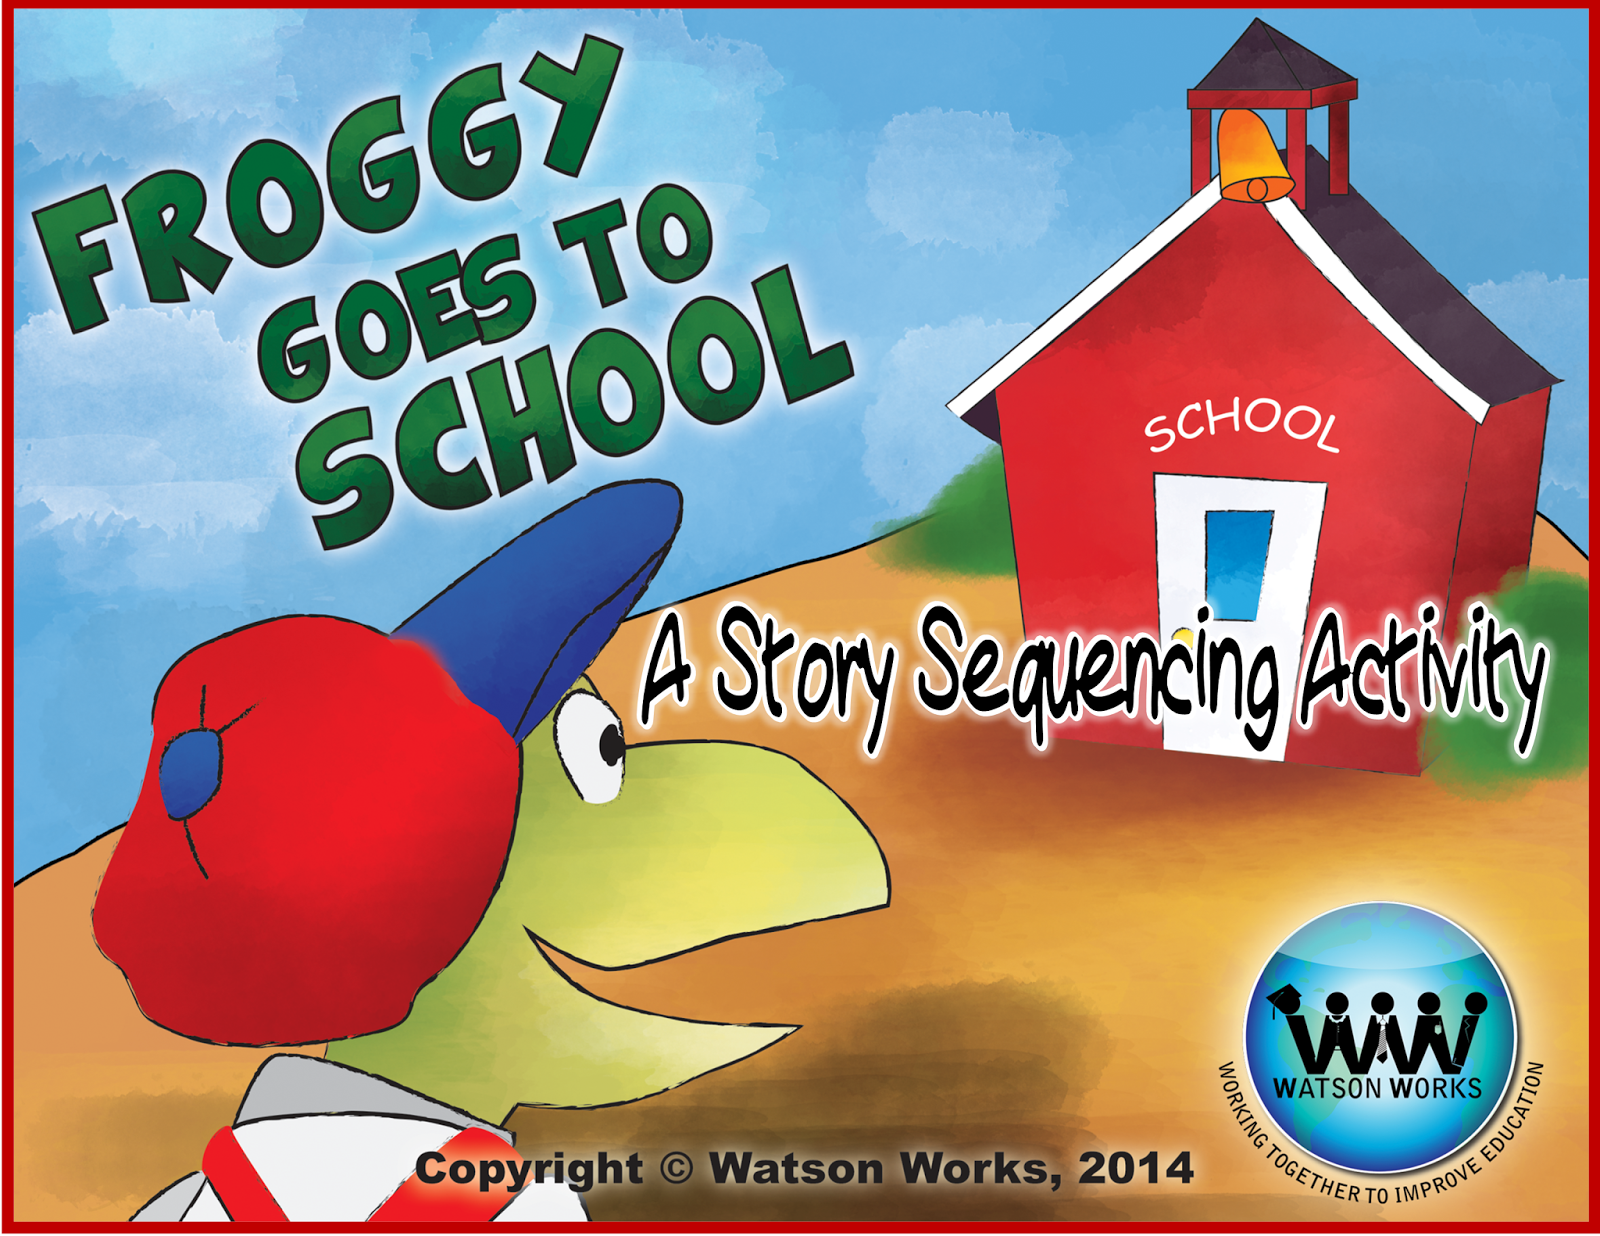 http://www.teacherspayteachers.com/Product/Froggy-Goes-to-School-A-Story-Sequencing-Activity-1355960